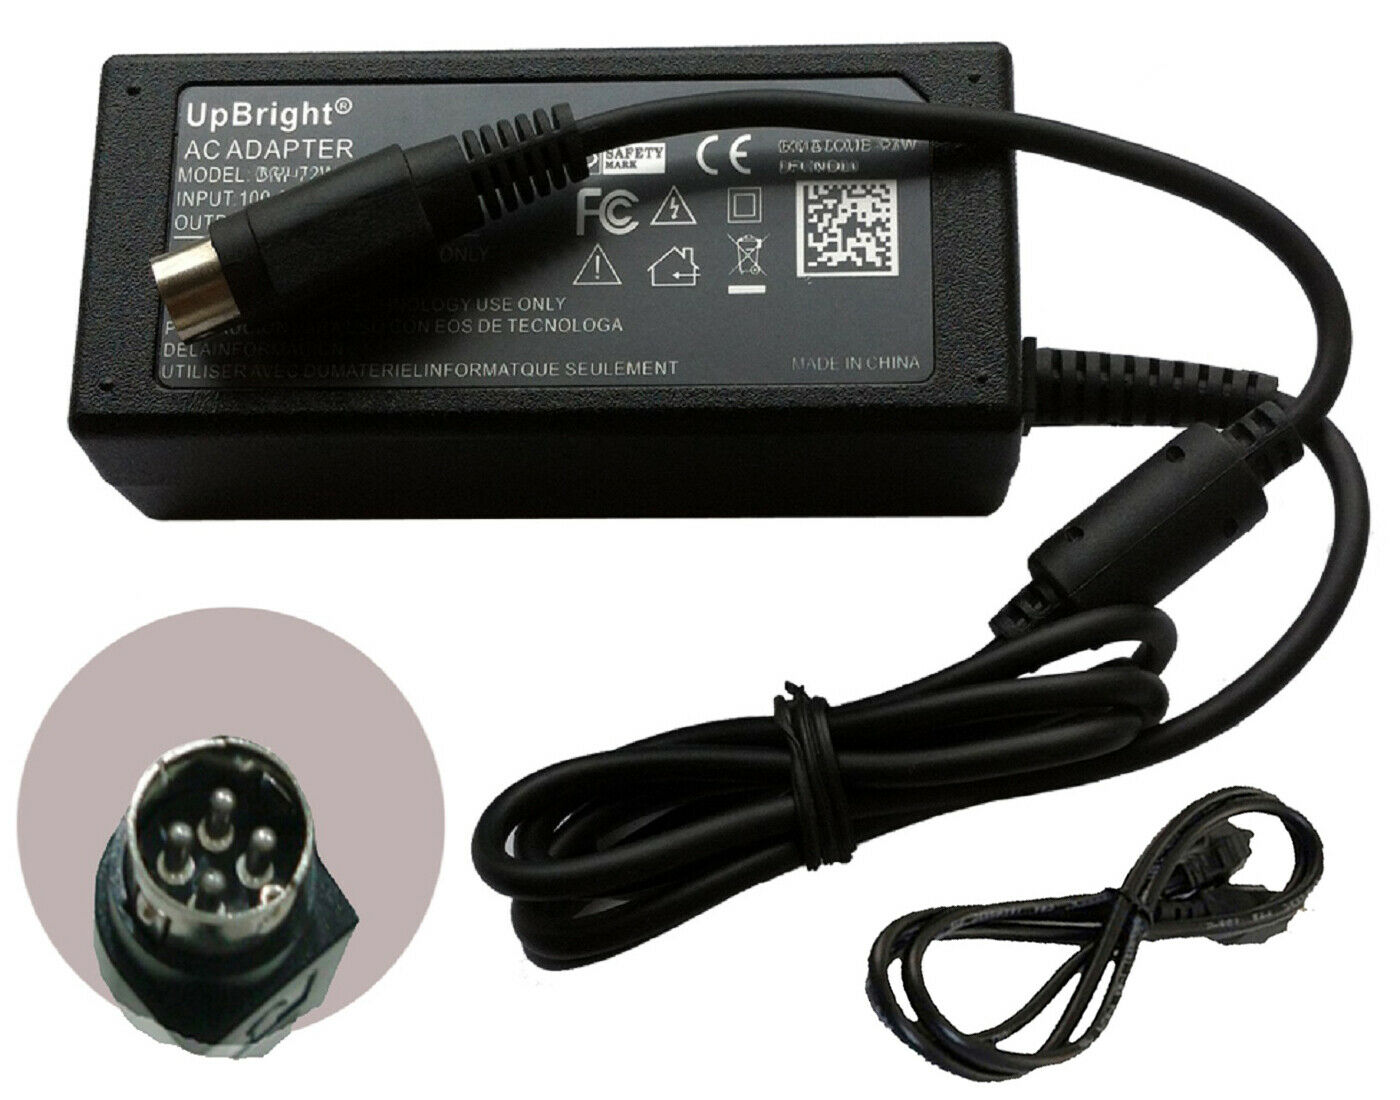 AC Adapter For Wacom Cintiq 21UX LCD Drawing Tablet DTK2100 DTZ2100 Power Supply